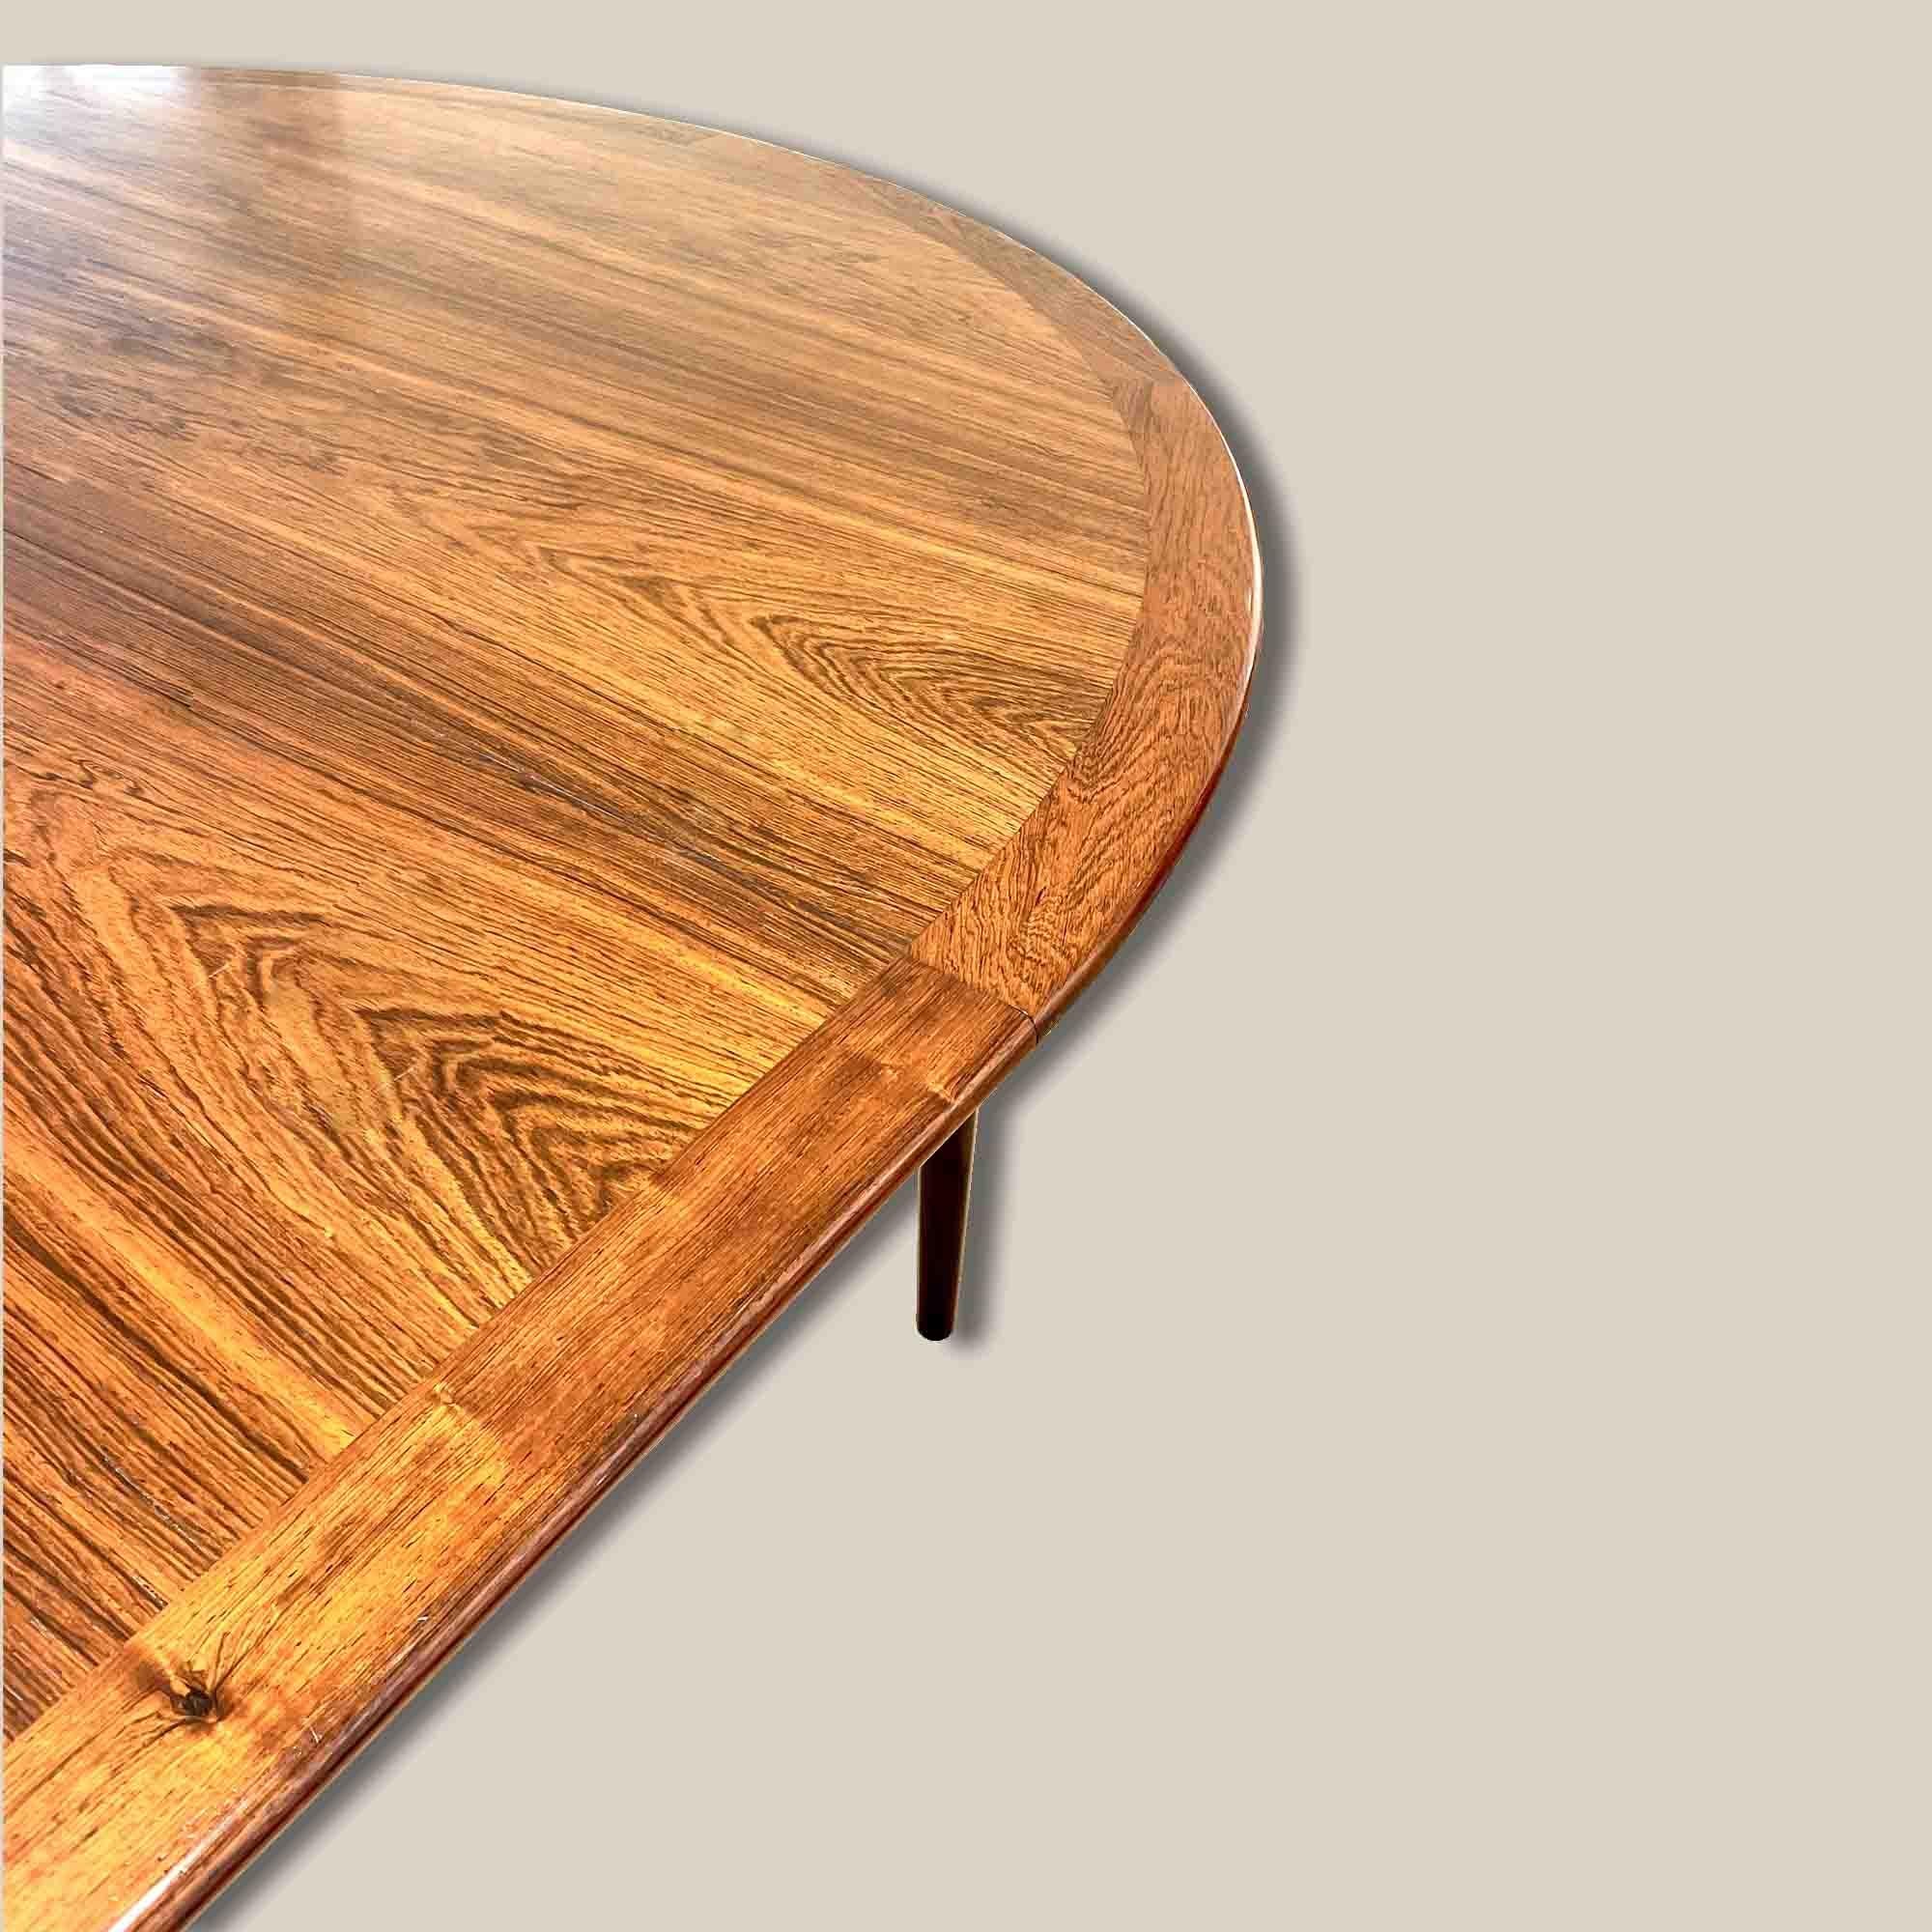 Mid-Century Modern Rosewood table by Grete Jalk, design 1959's